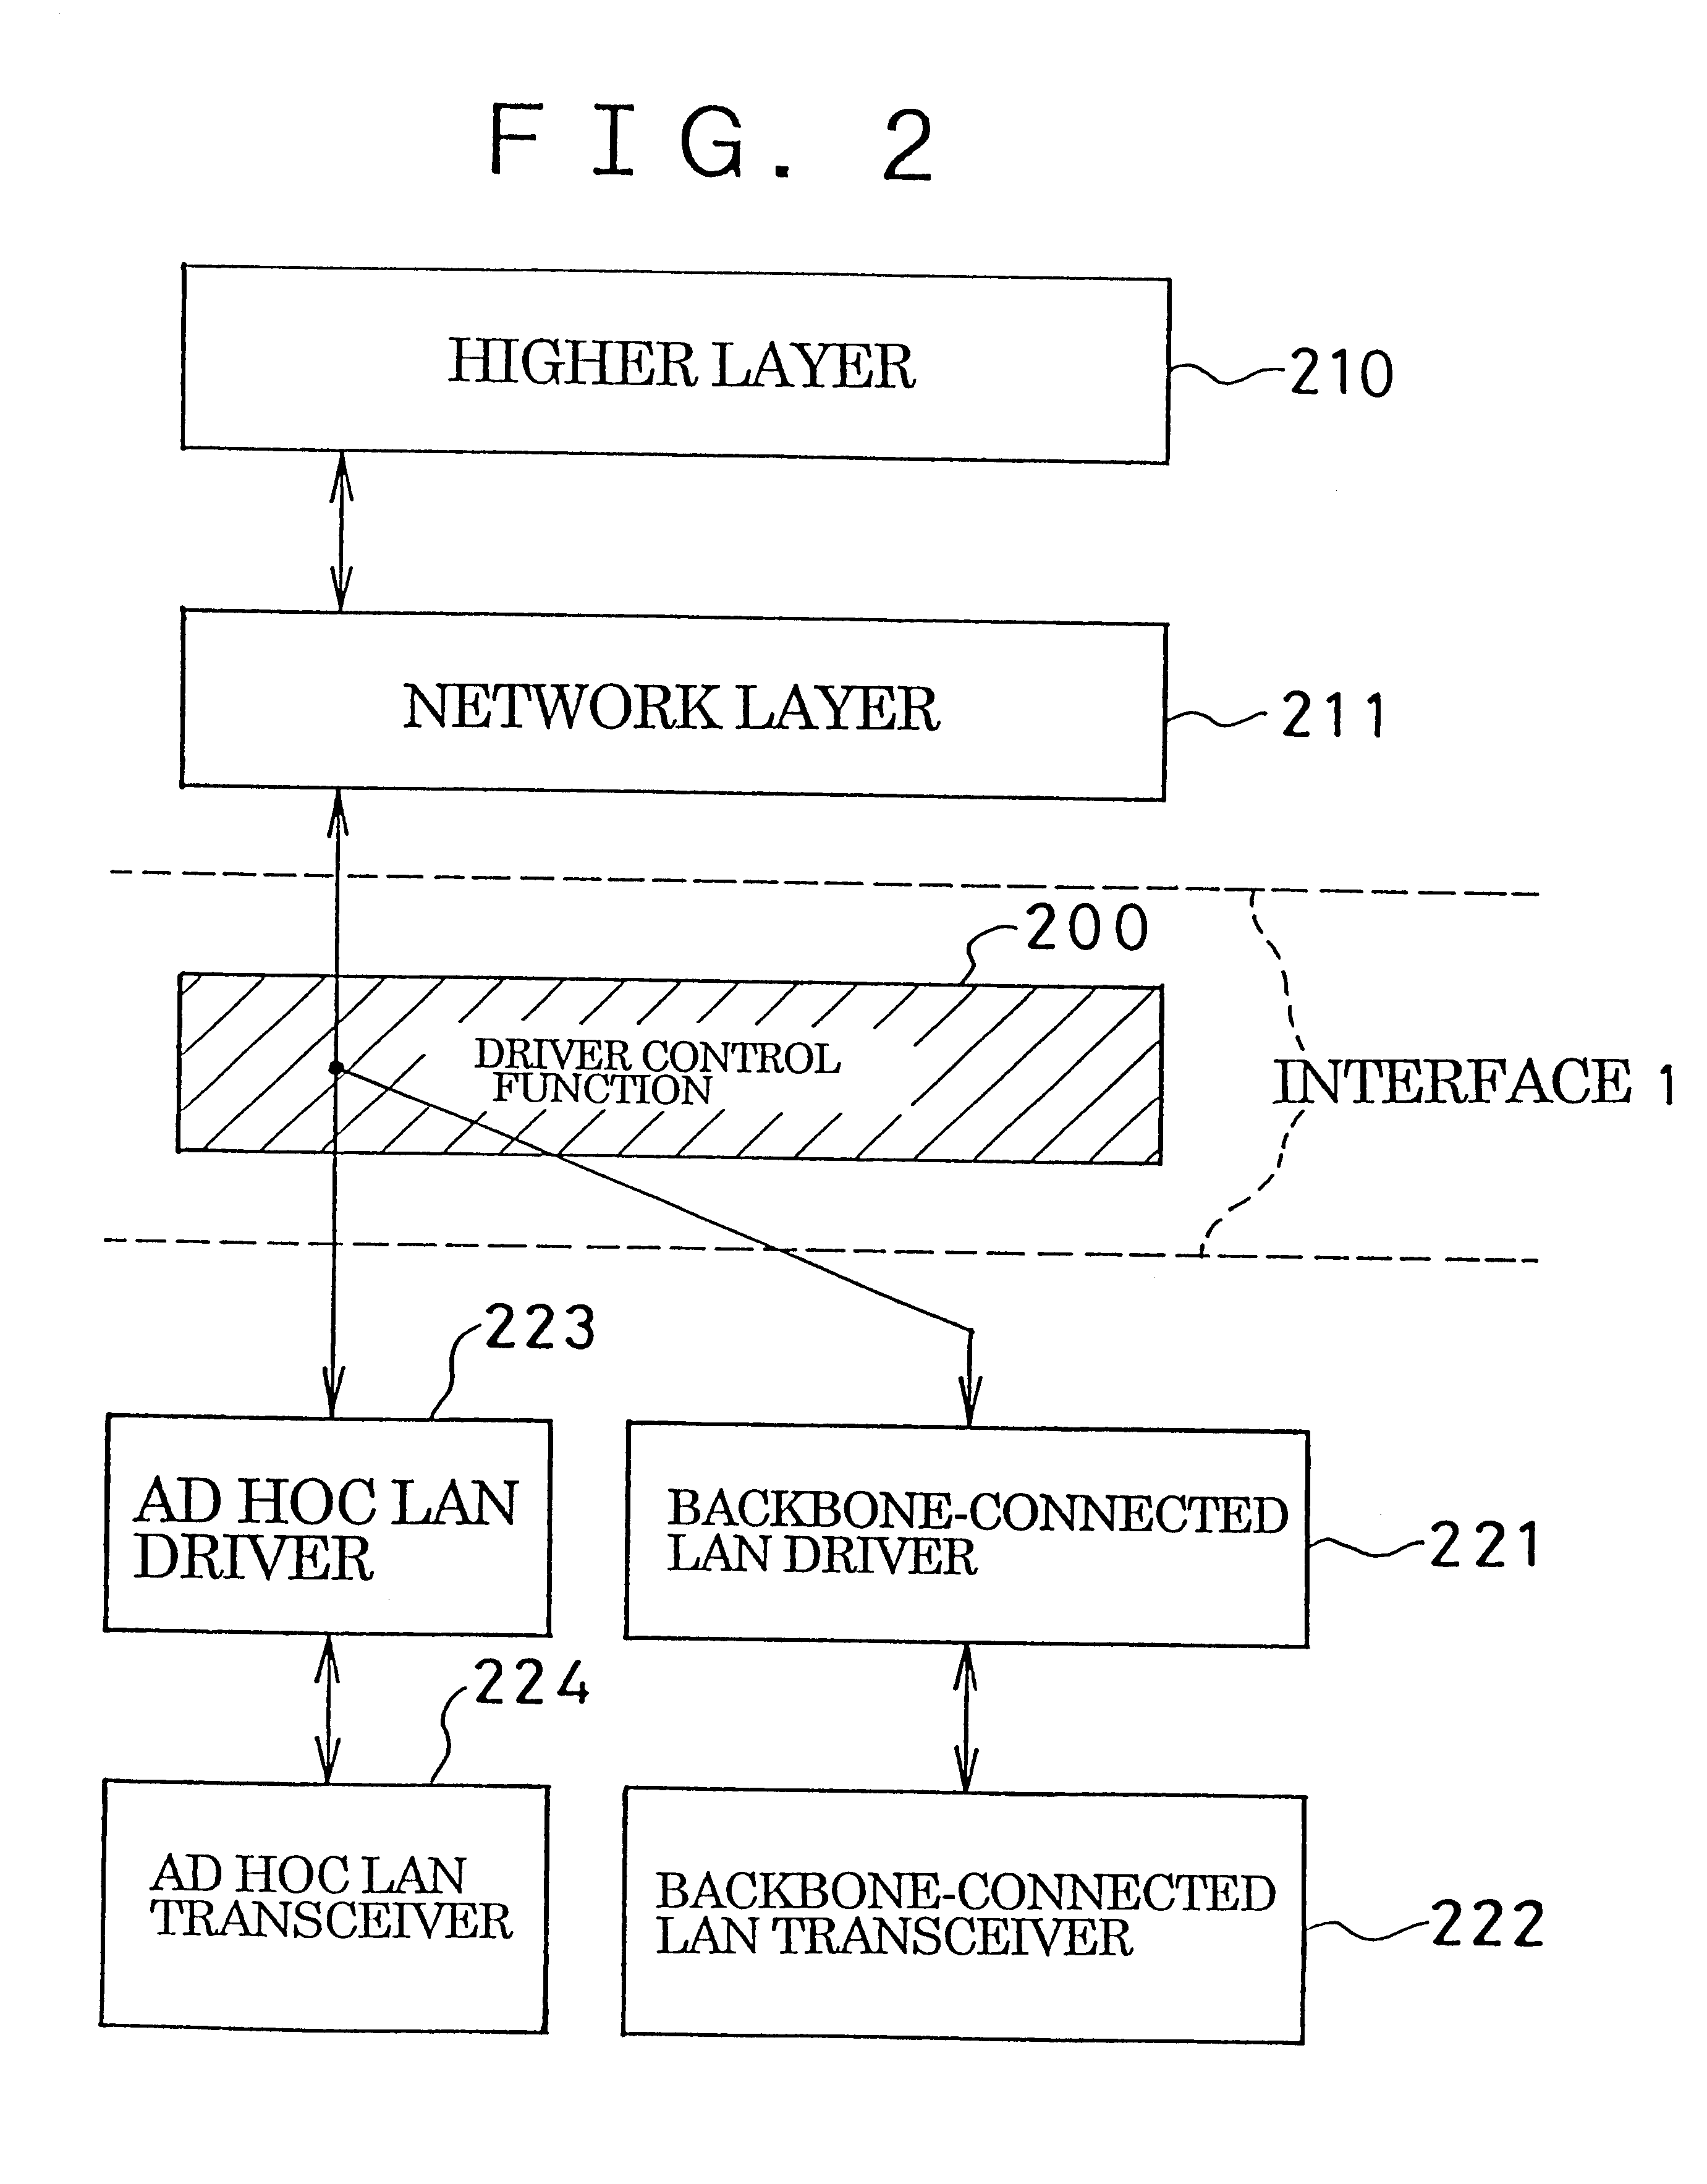 Method of setting up ad hoc local network, method of communicating using said network, and terminal for use with said network